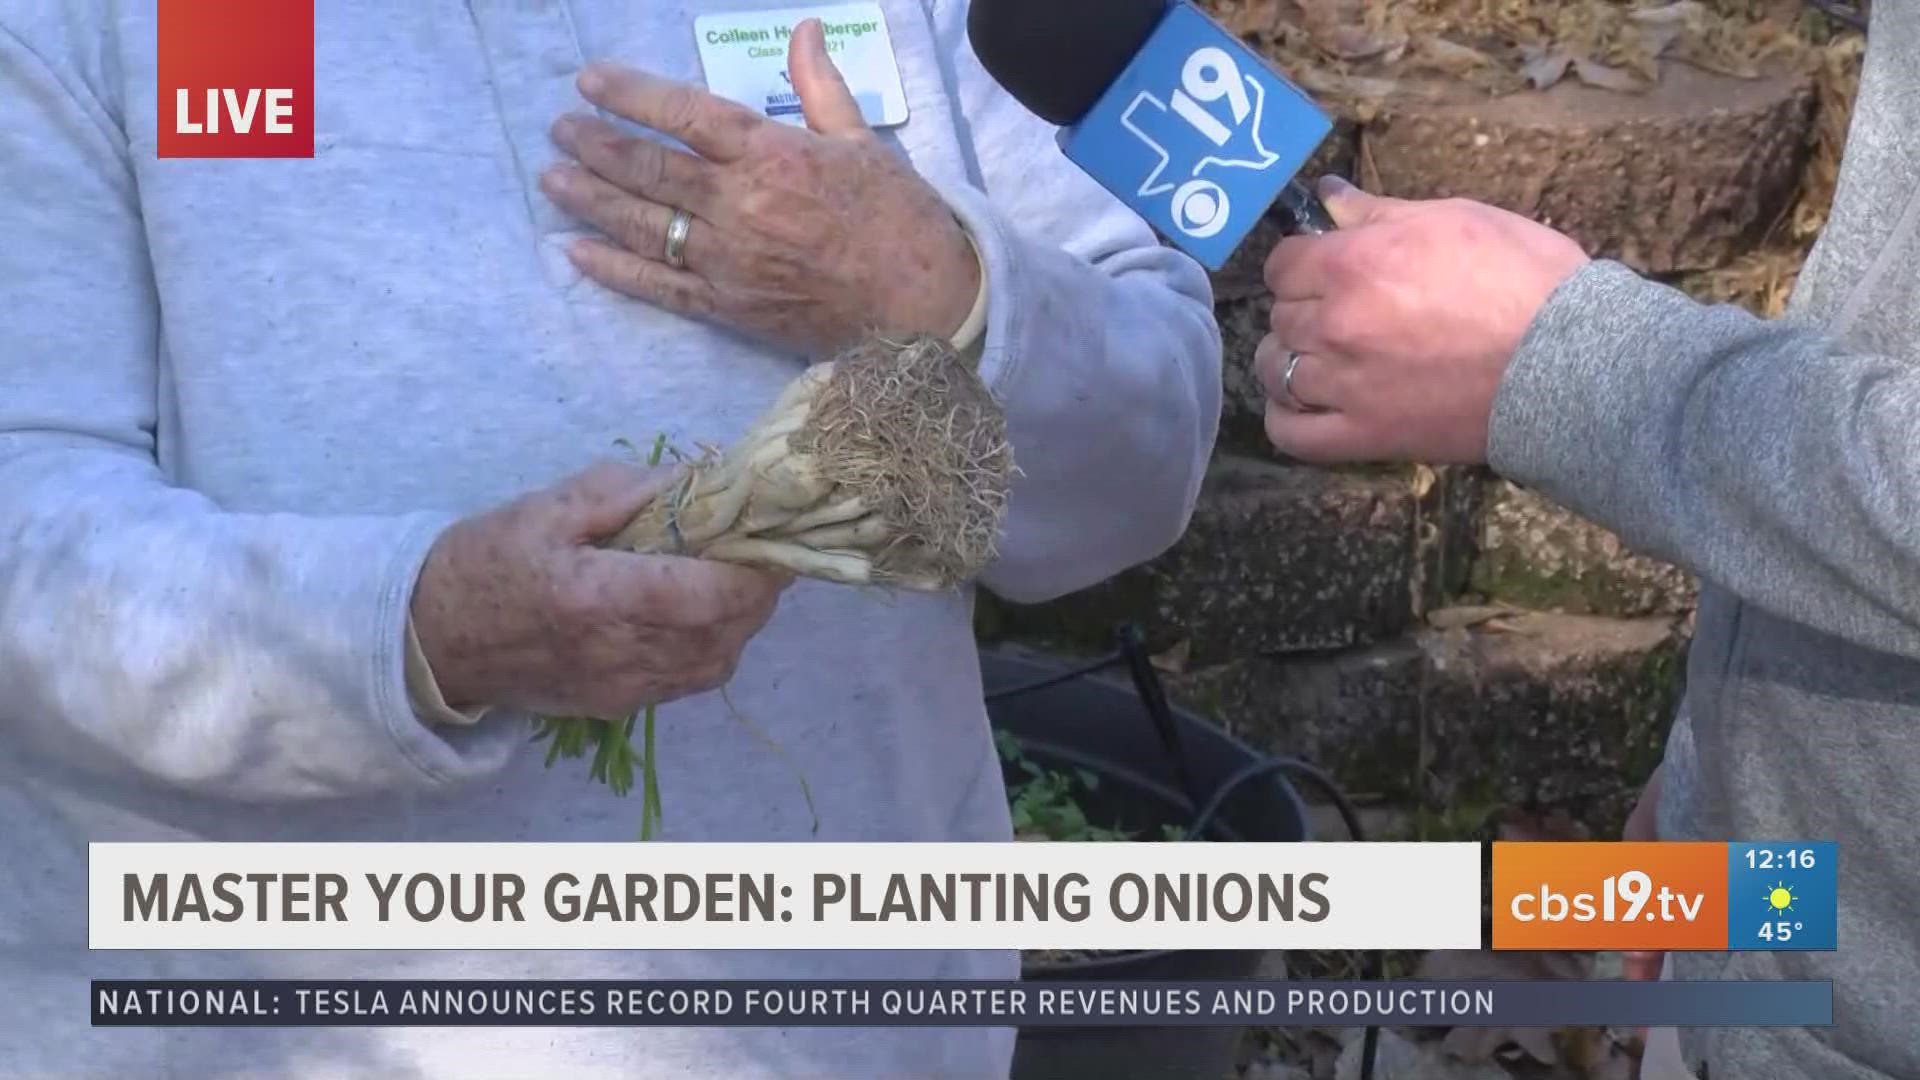 The Smith County Master Gardeners explain how to plant onions this winter!